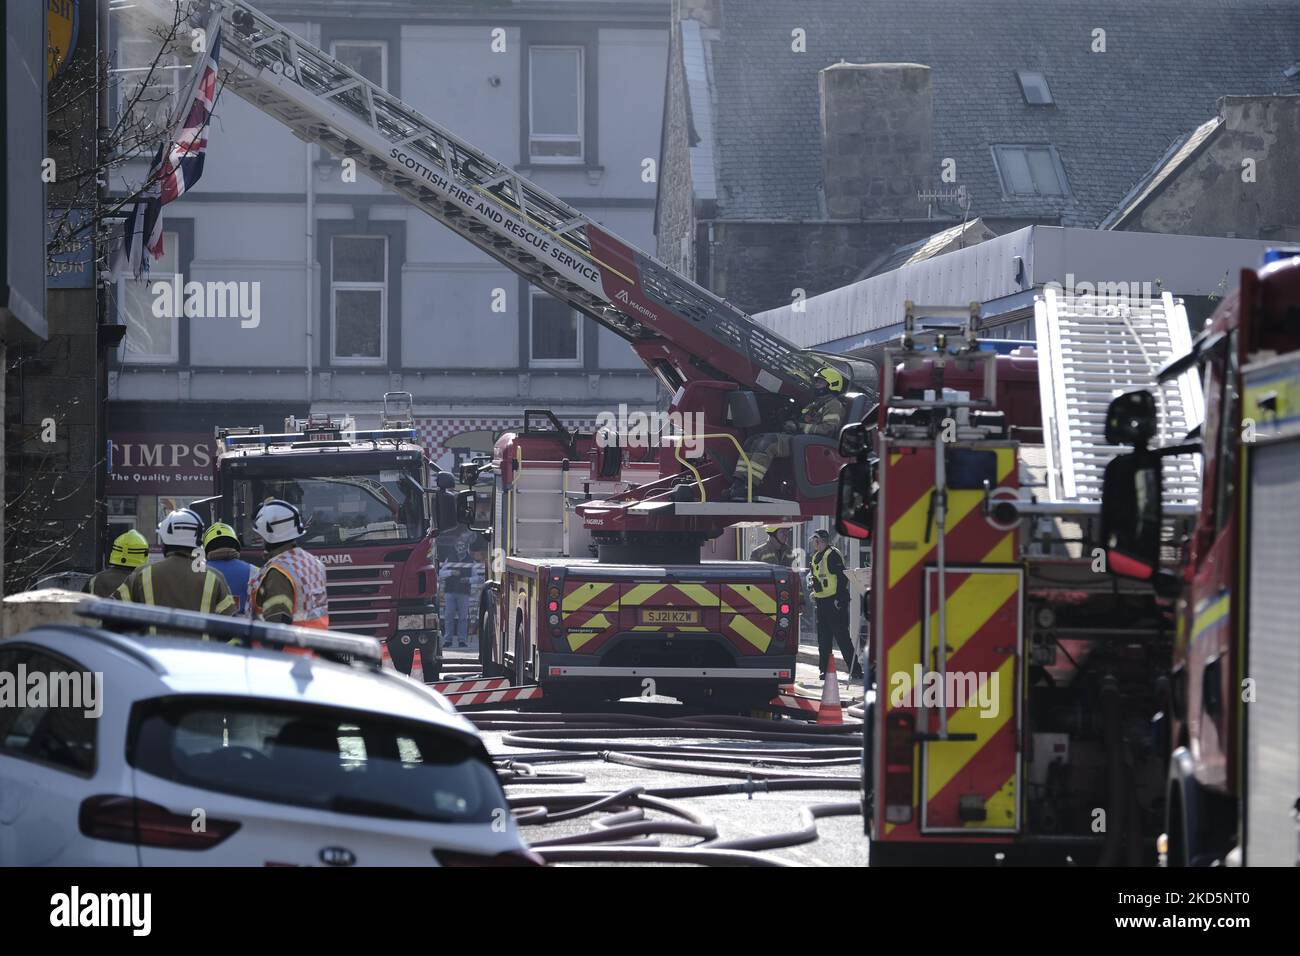 Firefighters attend a fire at the Royal British Legion in Park Street, Galashiels on Monday 21 March 2022. Fire Scotland attended with firefighters from four pumps and an elevated access platform to deal with the blaze in the 2 storey building in the centre of town (Photo by Rob Gray/NurPhoto) Stock Photo